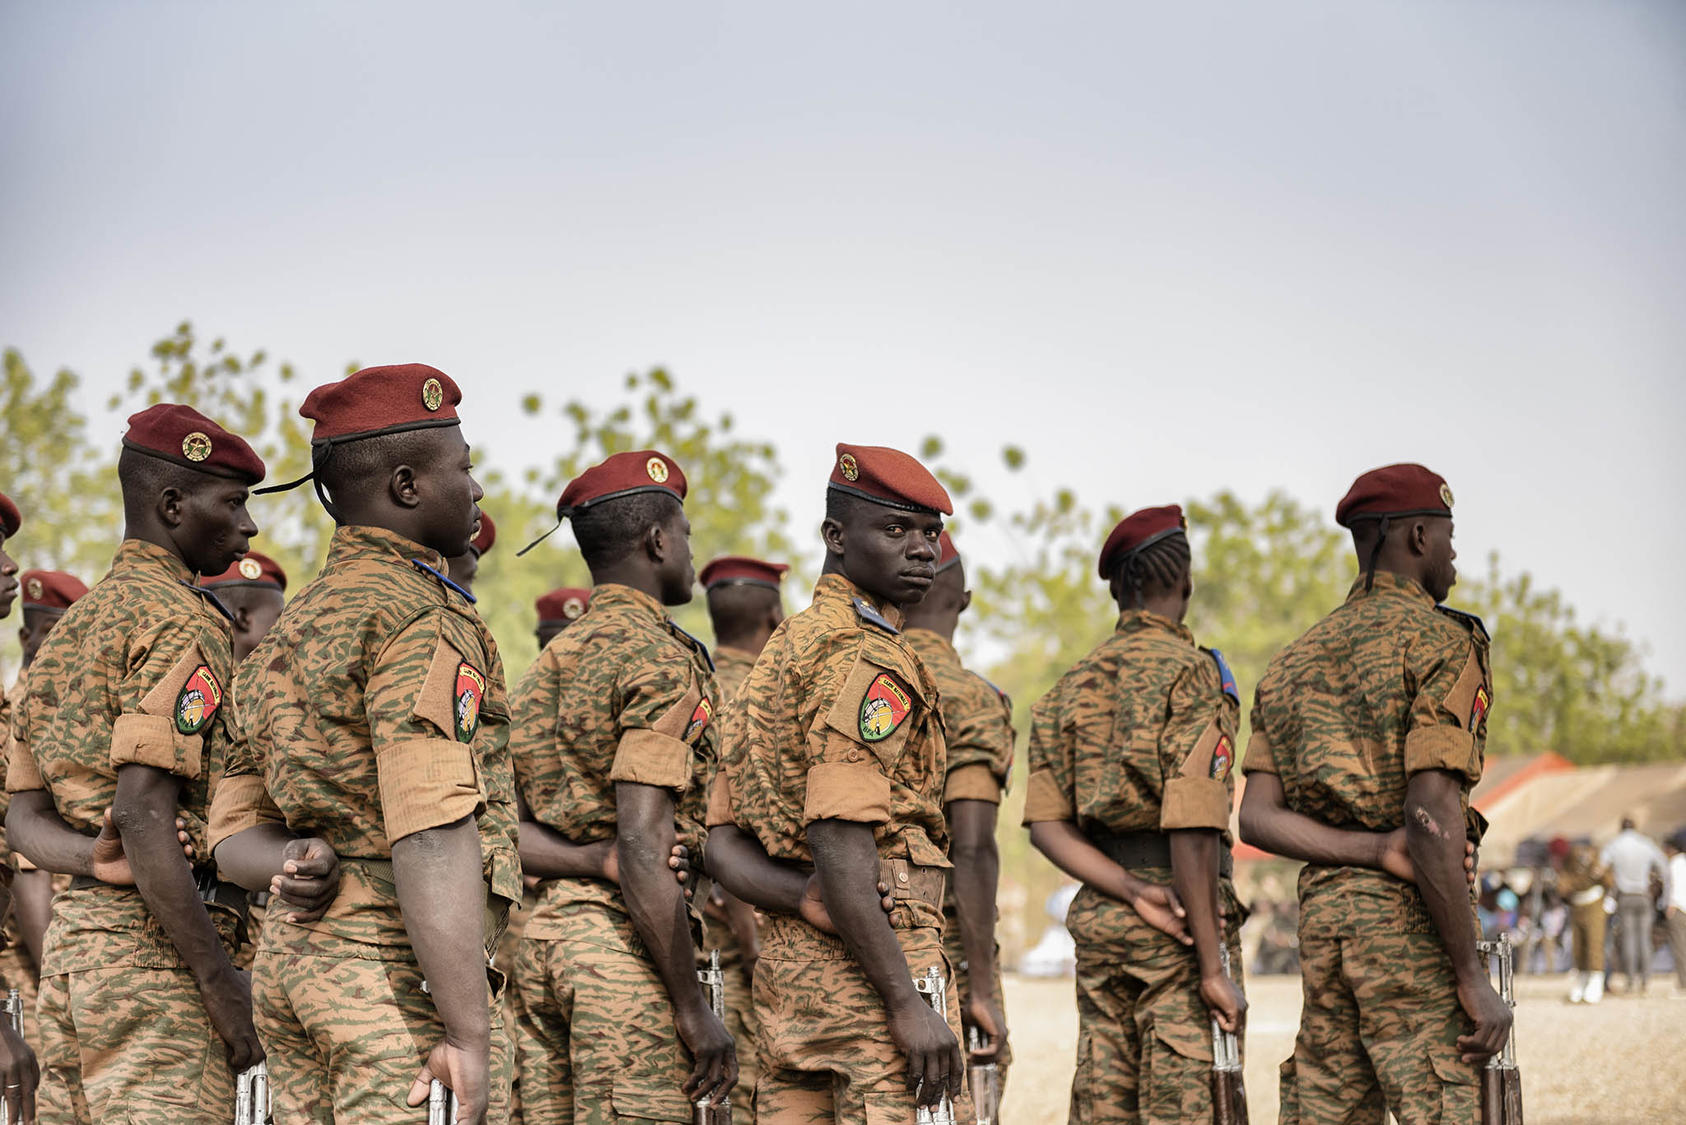 Burkina Faso troops train for their fight against ISIS-affiliated rebels in 2019. Corrupt, authoritarian rule has fueled both the insurgency and army coups—a violent cycle that can be broken with improved governance. (Laetitia Vancon/The New York Times)